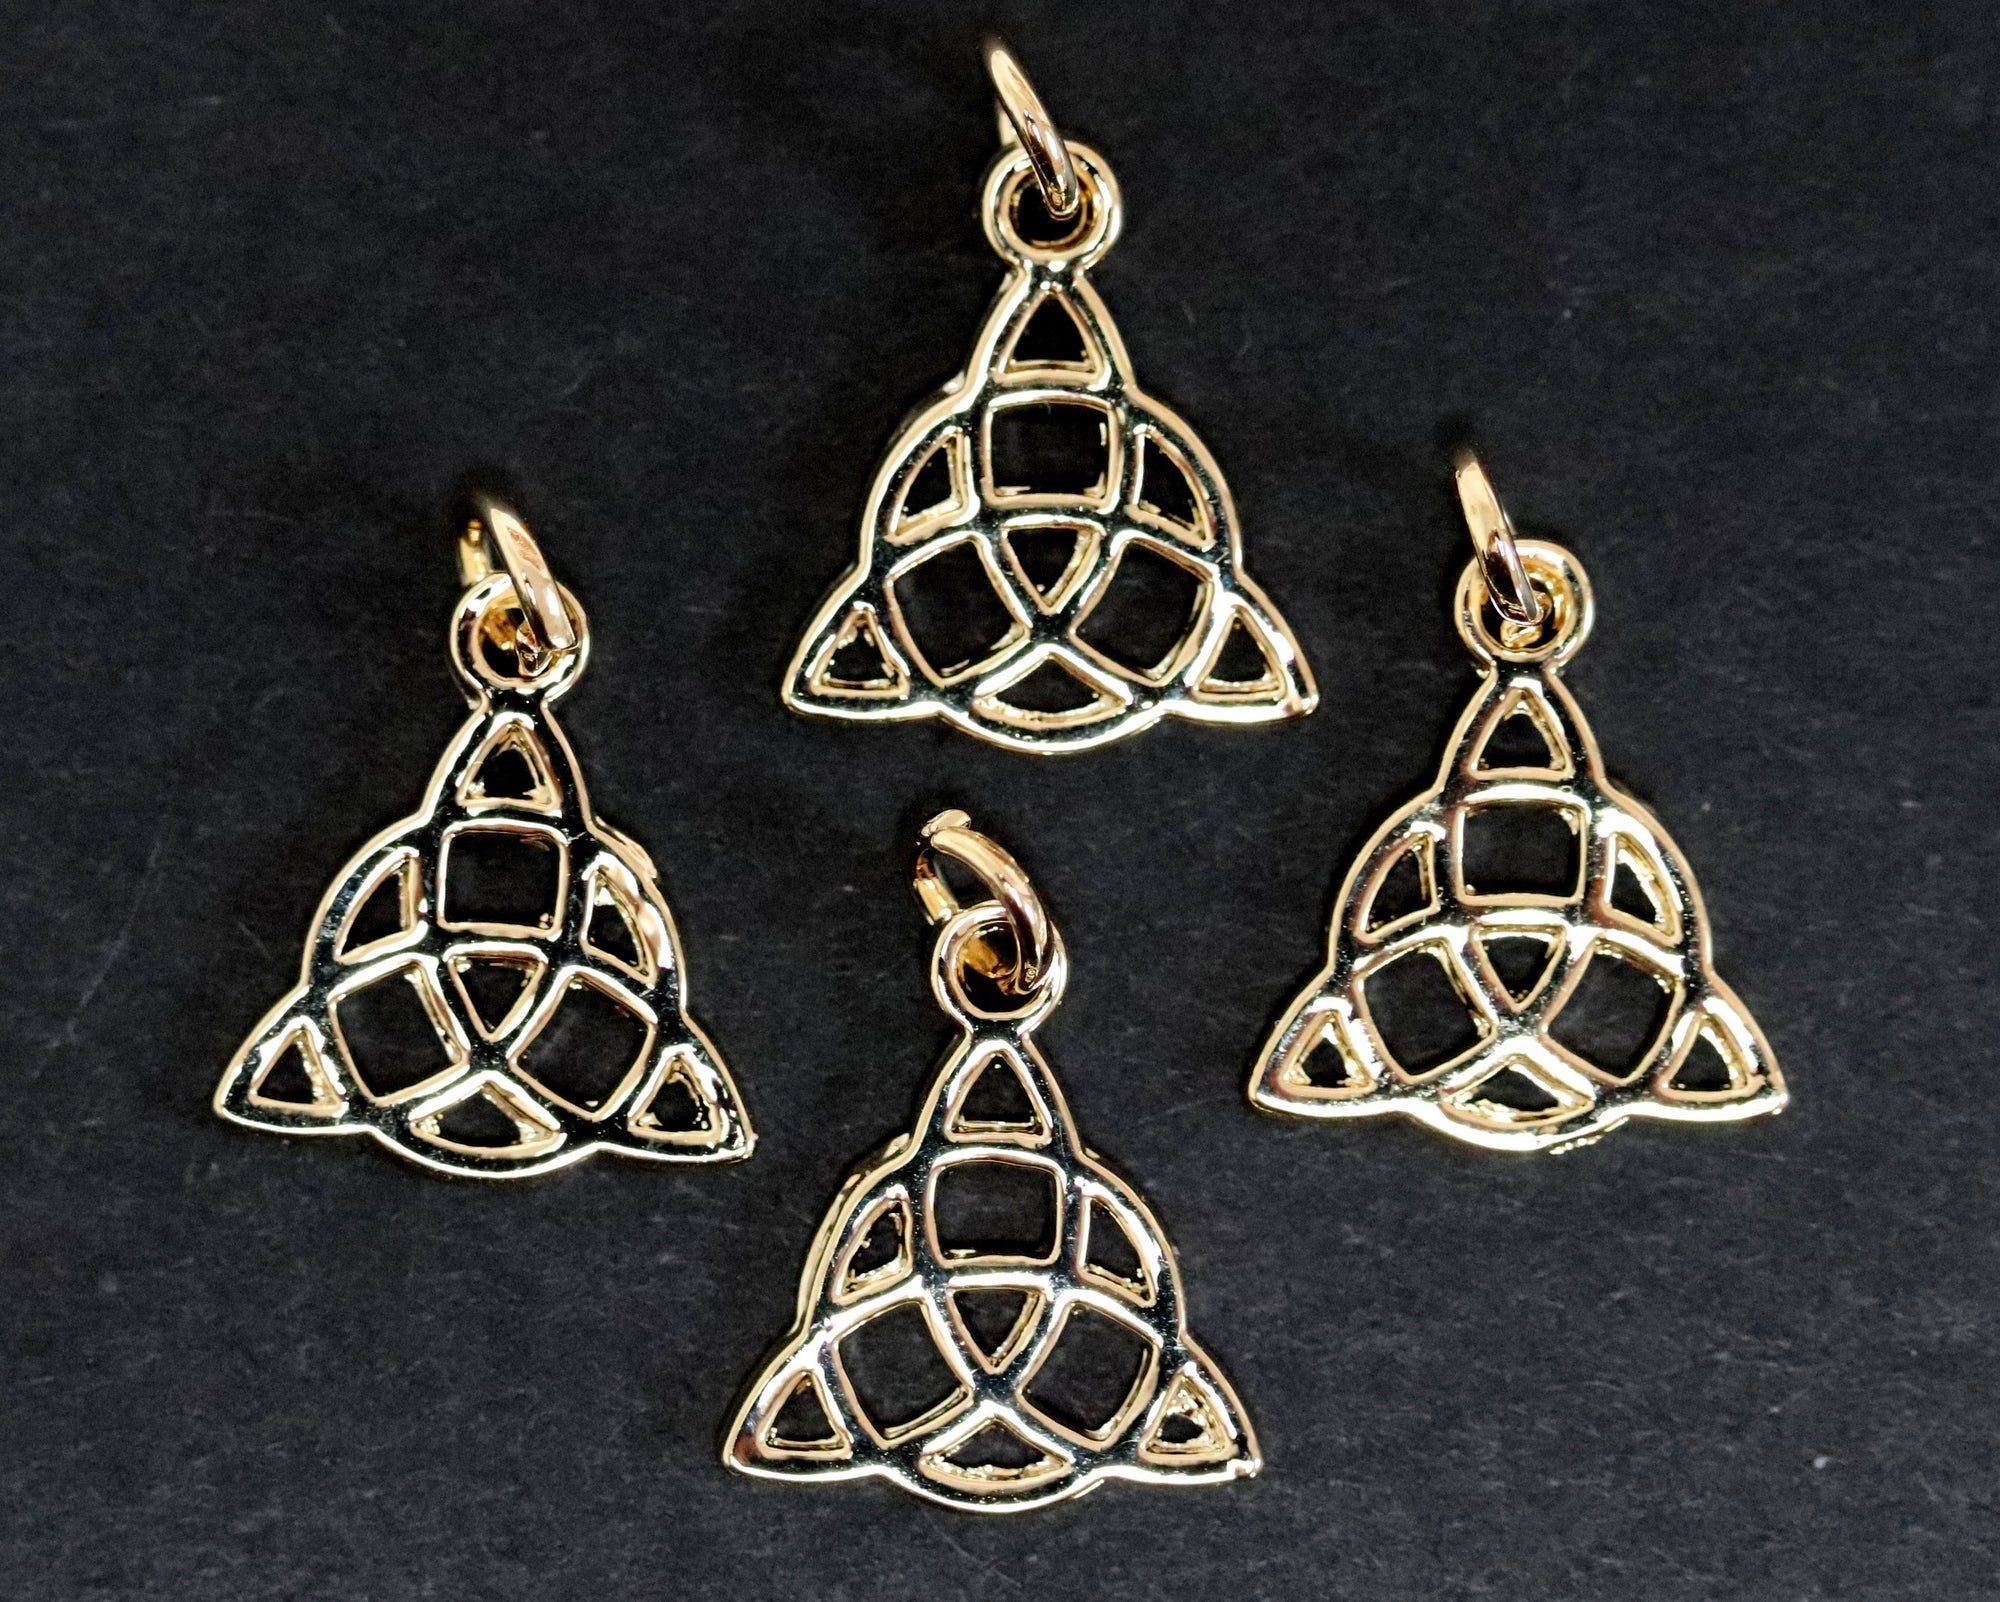 Celtic Trinity Knot charm 16x14mm 14K Gold plated metal alloy pendant